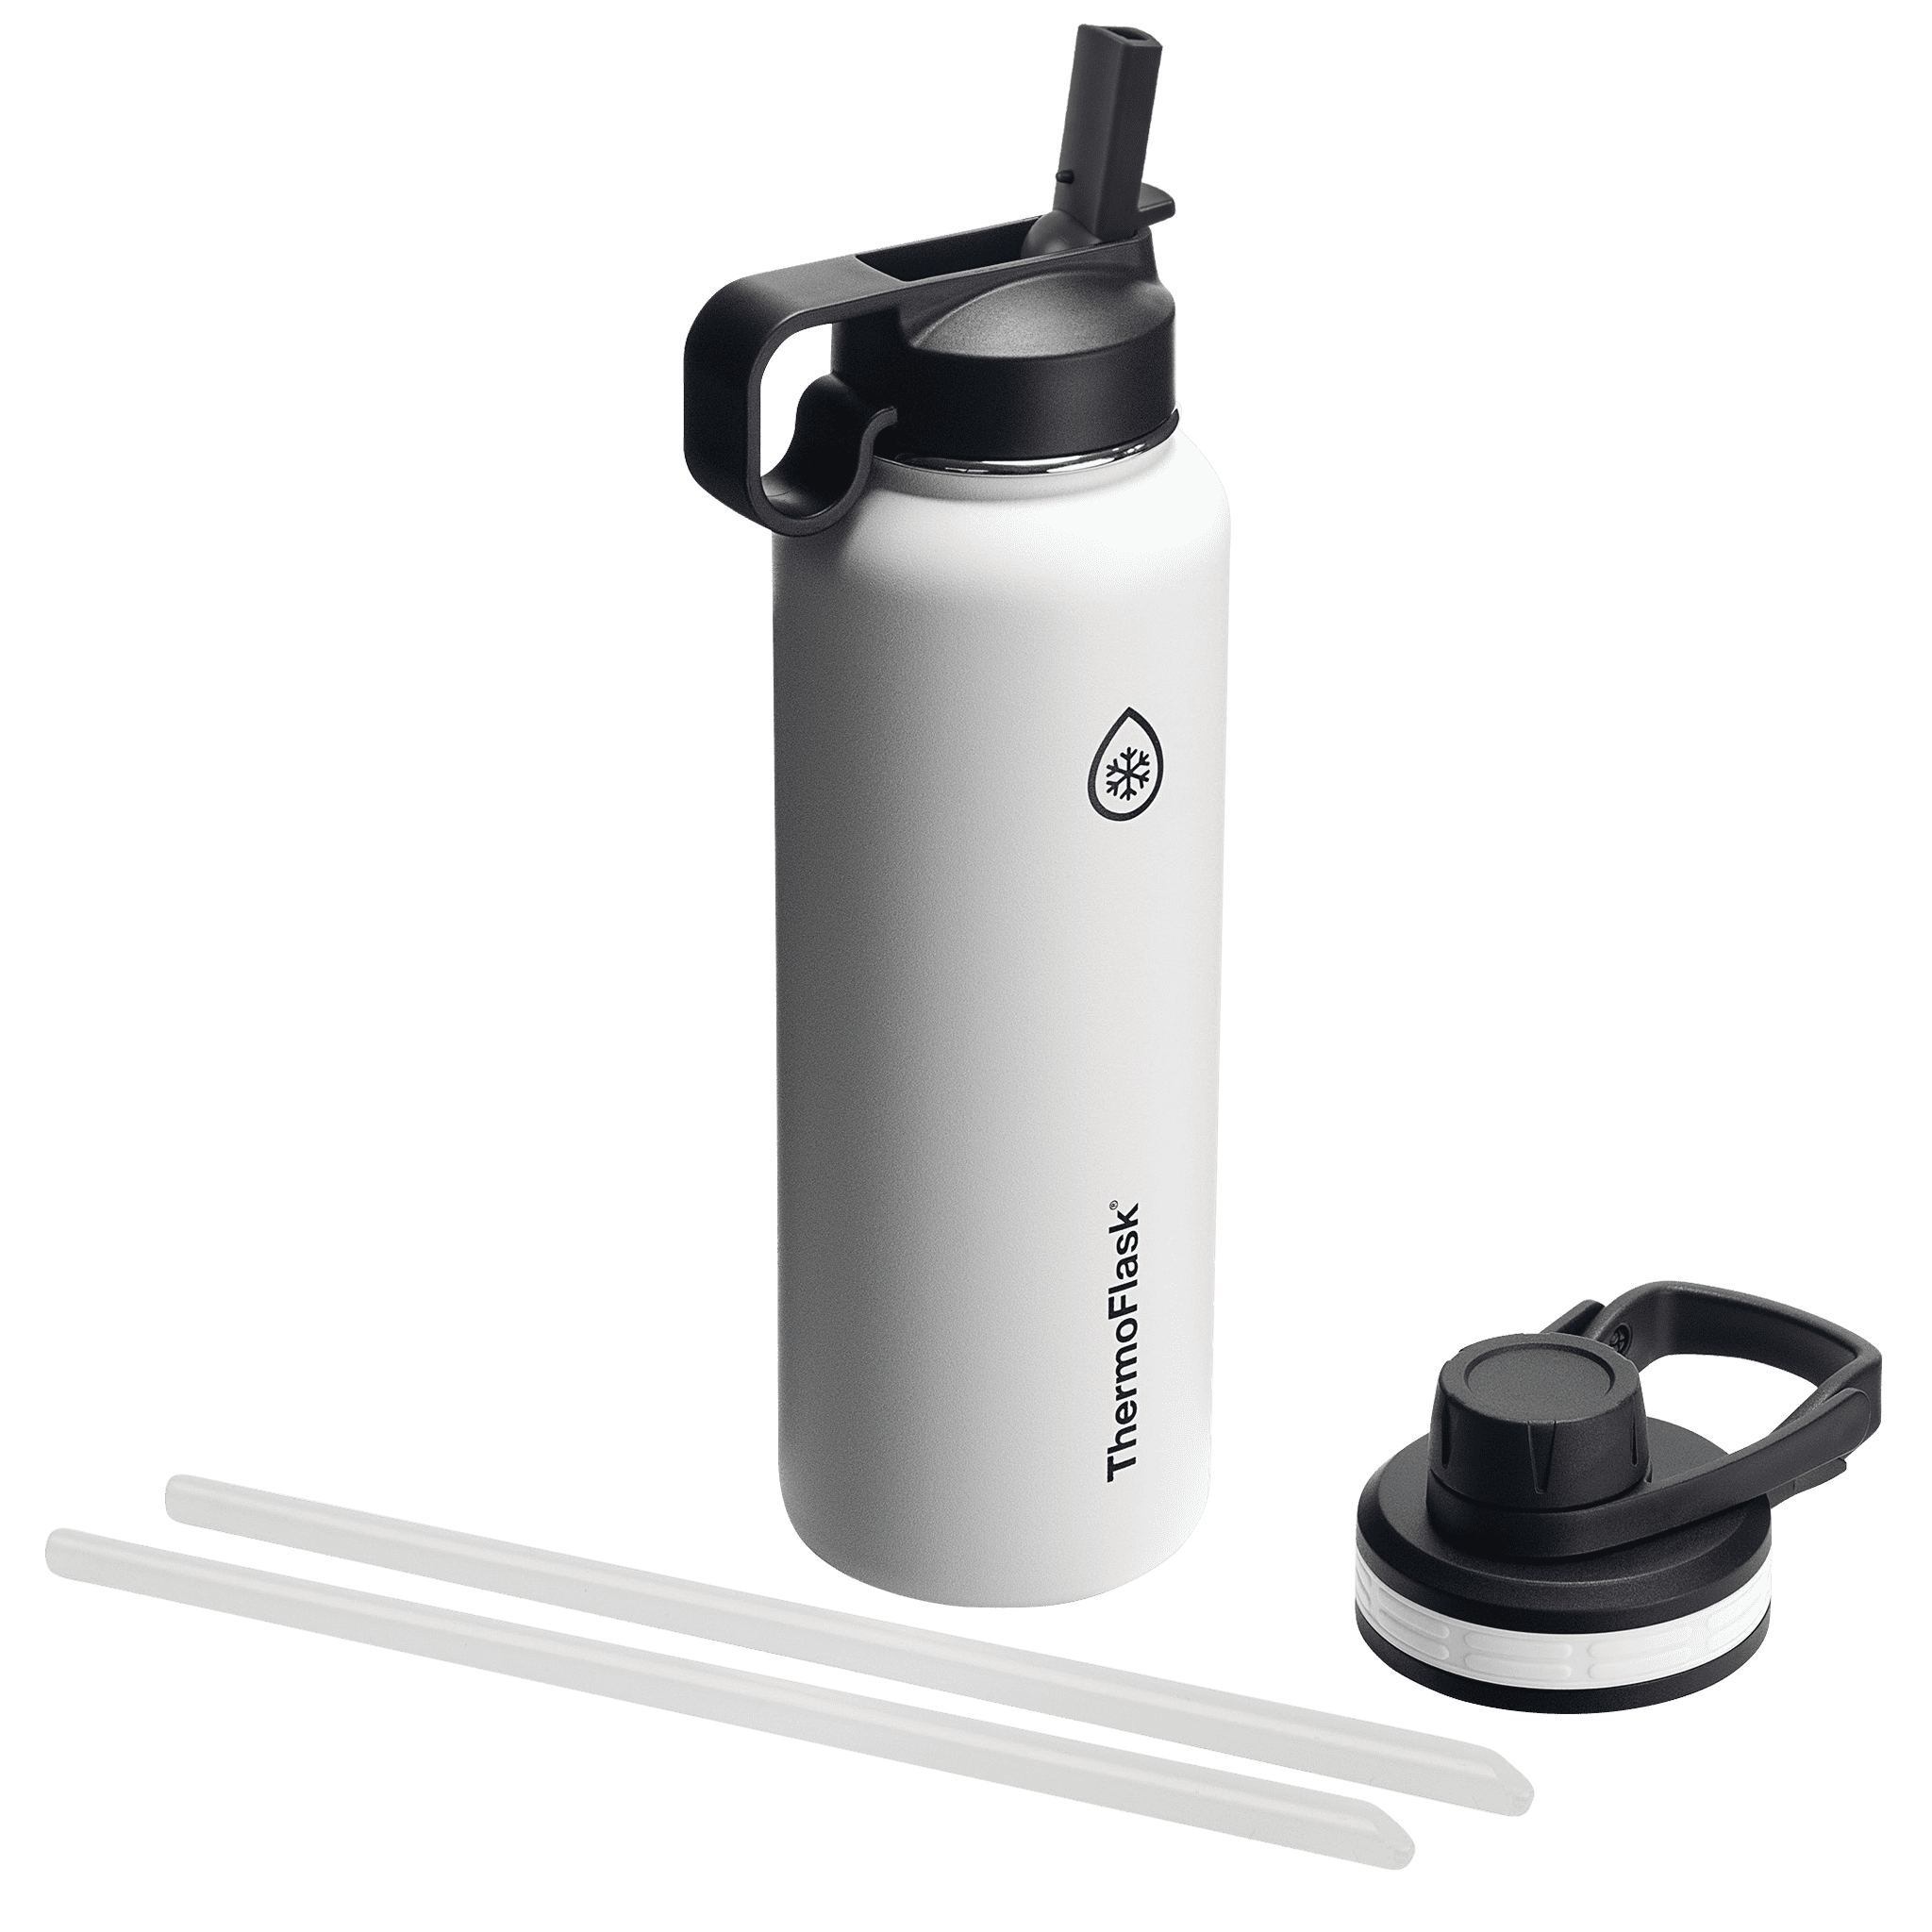 Thermoflask 24-Ounce Double Wall Vacuum Insulated Stainless Steel Water Bottles 2-Piece 